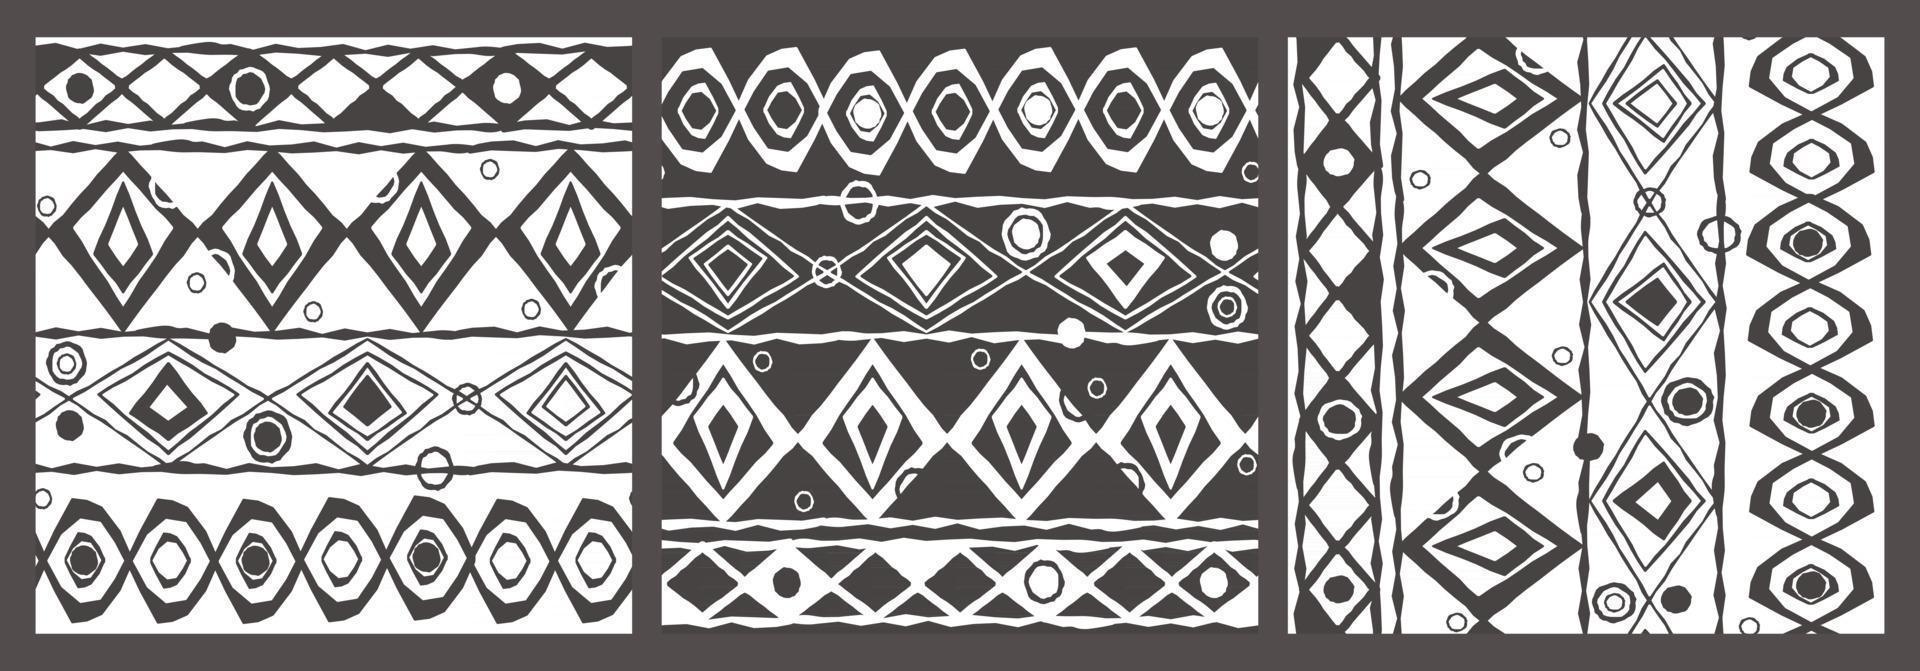 Gray white seamless geometric endless pattern of curved circles, arcs, rhombuses, triangles. Ethnic motives. Image contains three variants of the same pattern vector